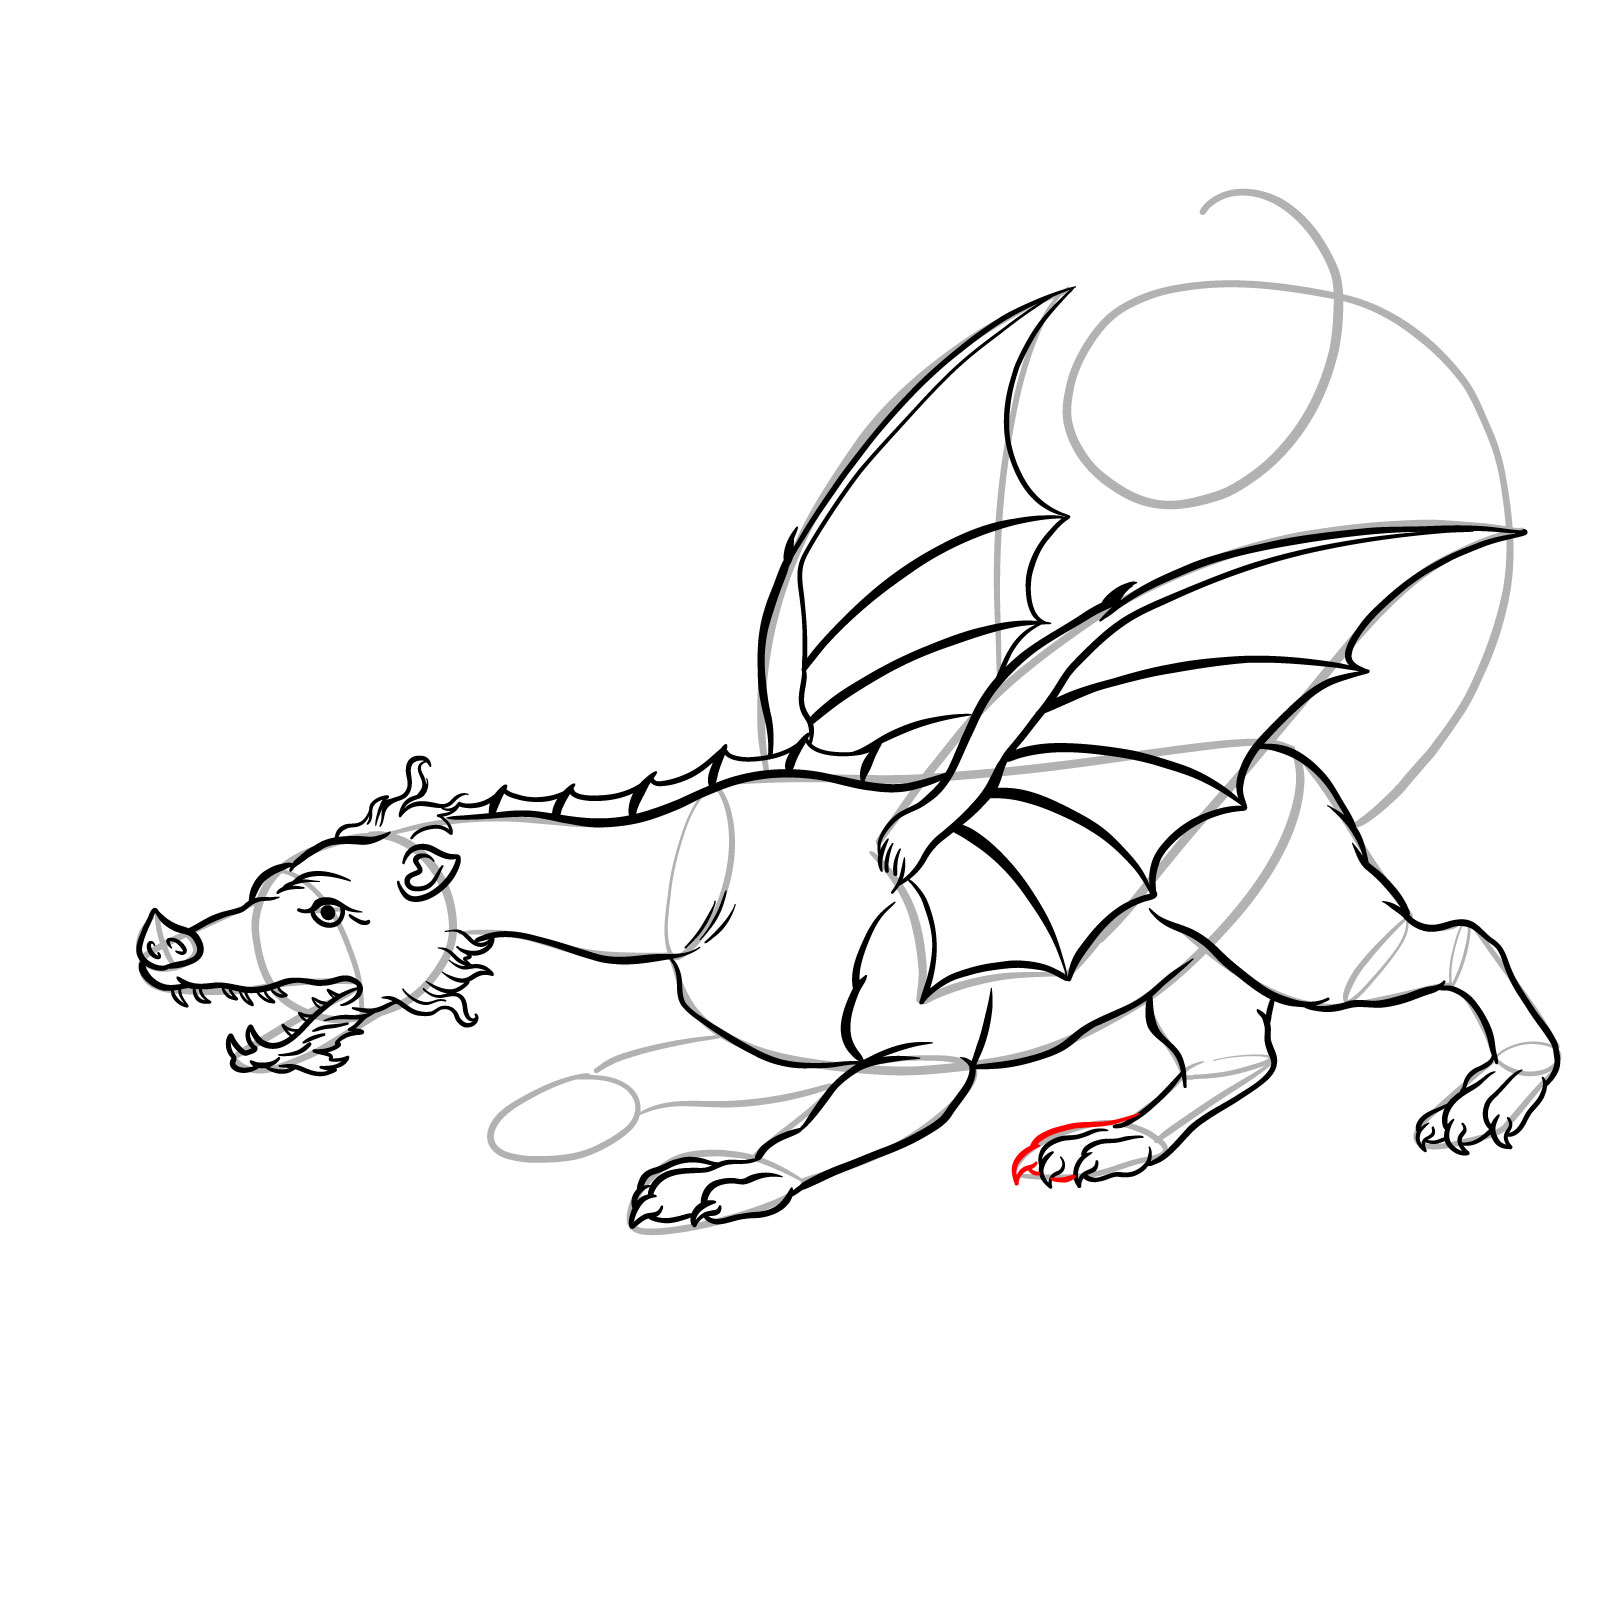 How to draw a classic European dragon - step 37